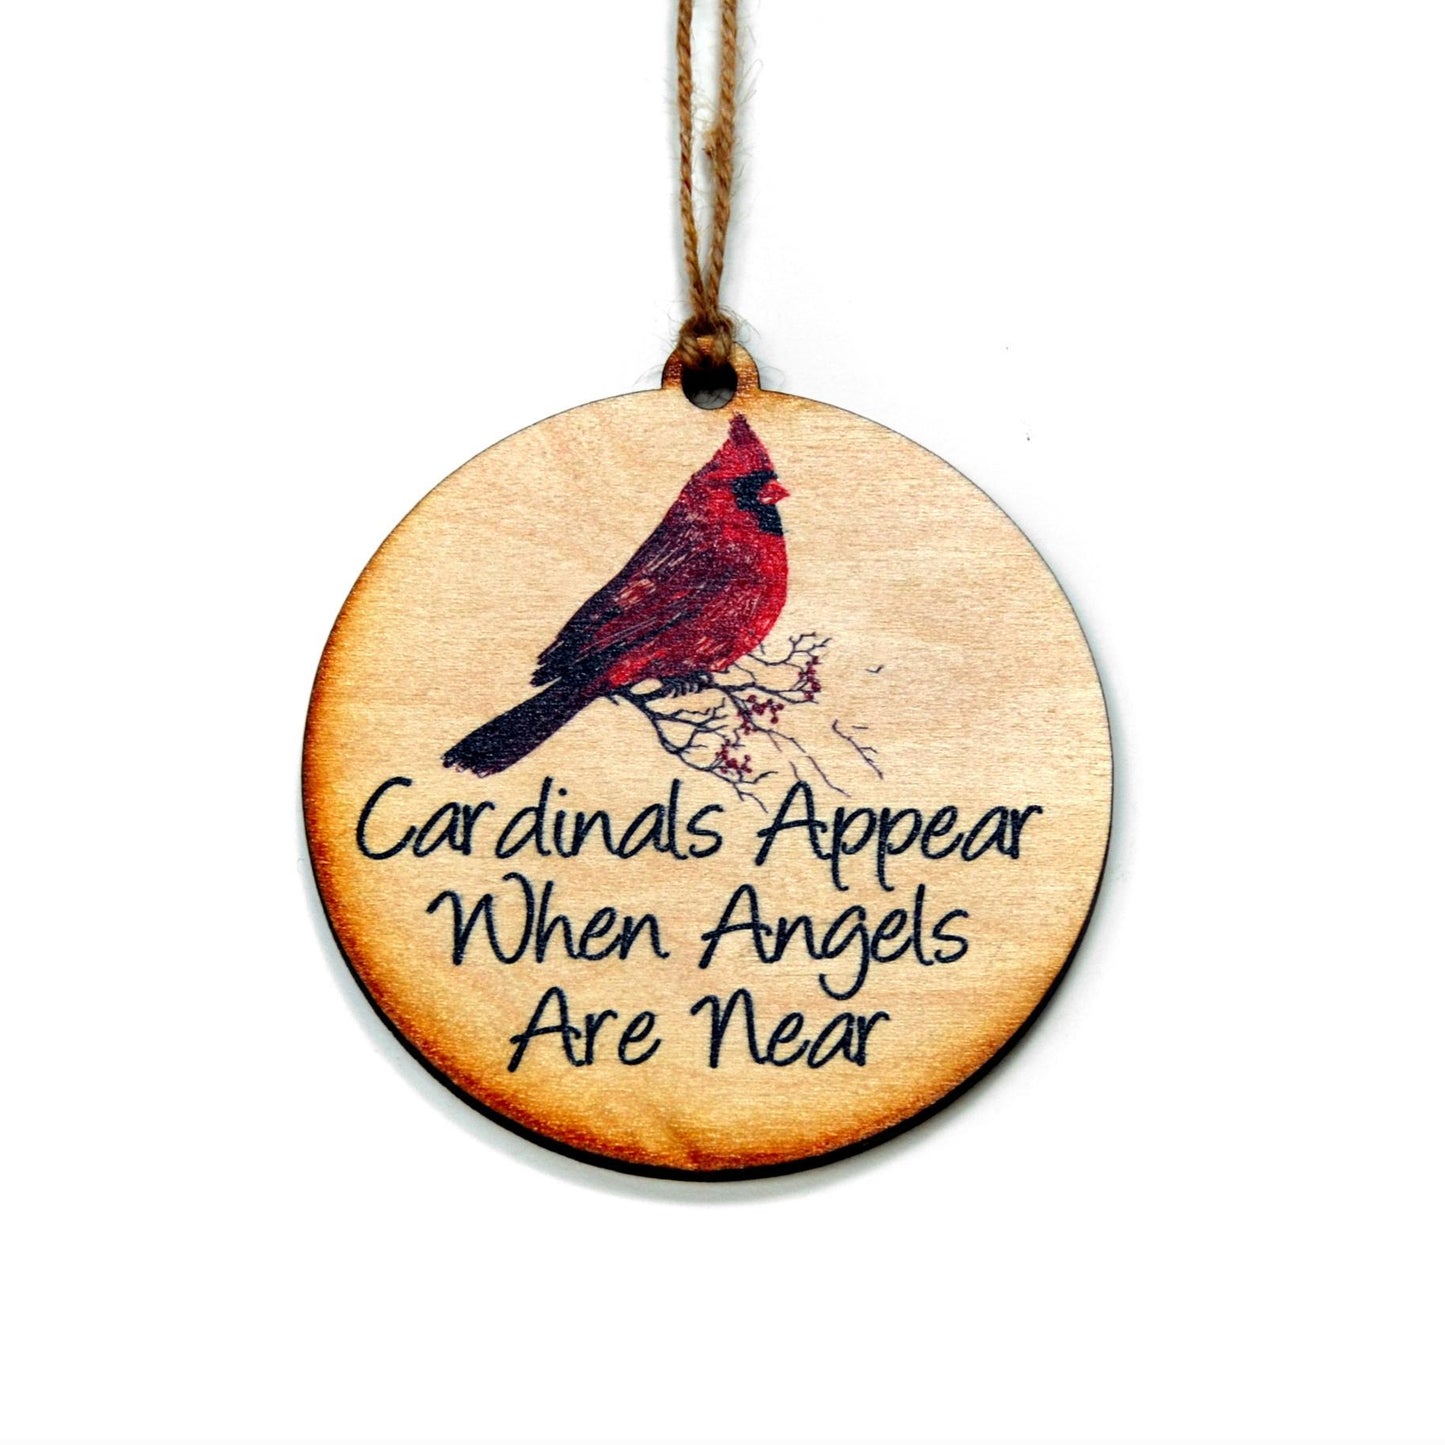 When angels are near, cardinals appear